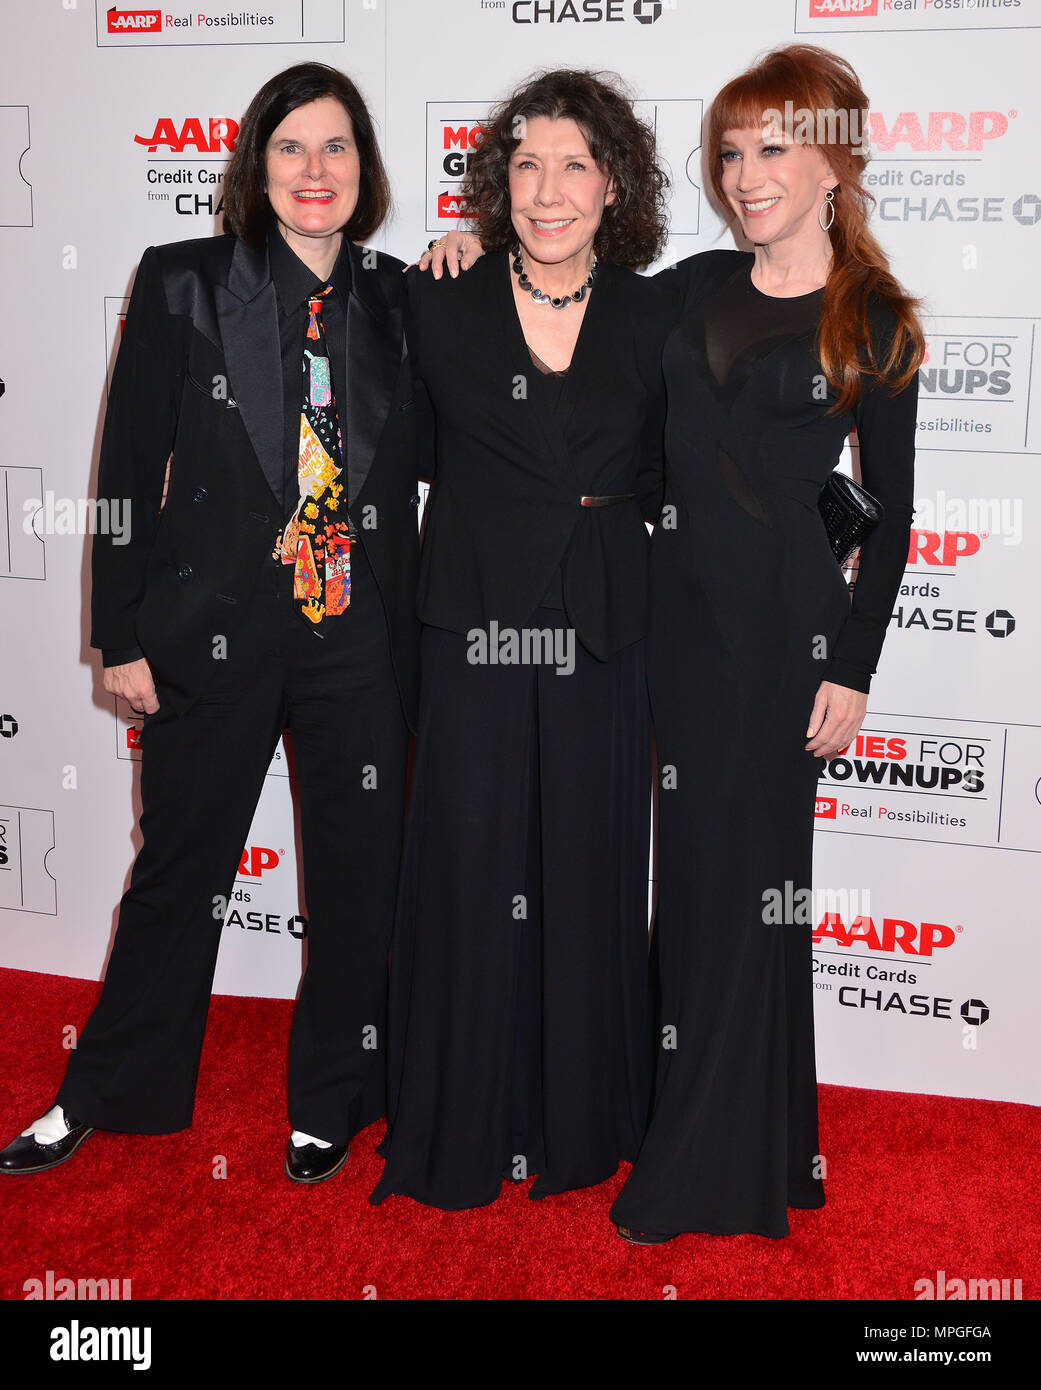 Paula Poundstone, Lilyb Tomlin, Kathy Griffin  at the Movies For Grow Ups - AARP - at the Beverly Wilshire Hotel in Los Angeles. February 8, 2016.Paula Poundstone, Lilyb Tomlin, Kathy Griffin   Event in Hollywood Life - California, Red Carpet Event, USA, Film Industry, Celebrities, Photography, Bestof, Arts Culture and Entertainment, Topix Celebrities fashion, Best of, Hollywood Life, Event in Hollywood Life - California, Red Carpet and backstage, movie celebrities, TV celebrities, Music celebrities, Arts Culture and Entertainment, vertical, one person, Photography,    inquiry tsuni@Gamma-USA. Stock Photo